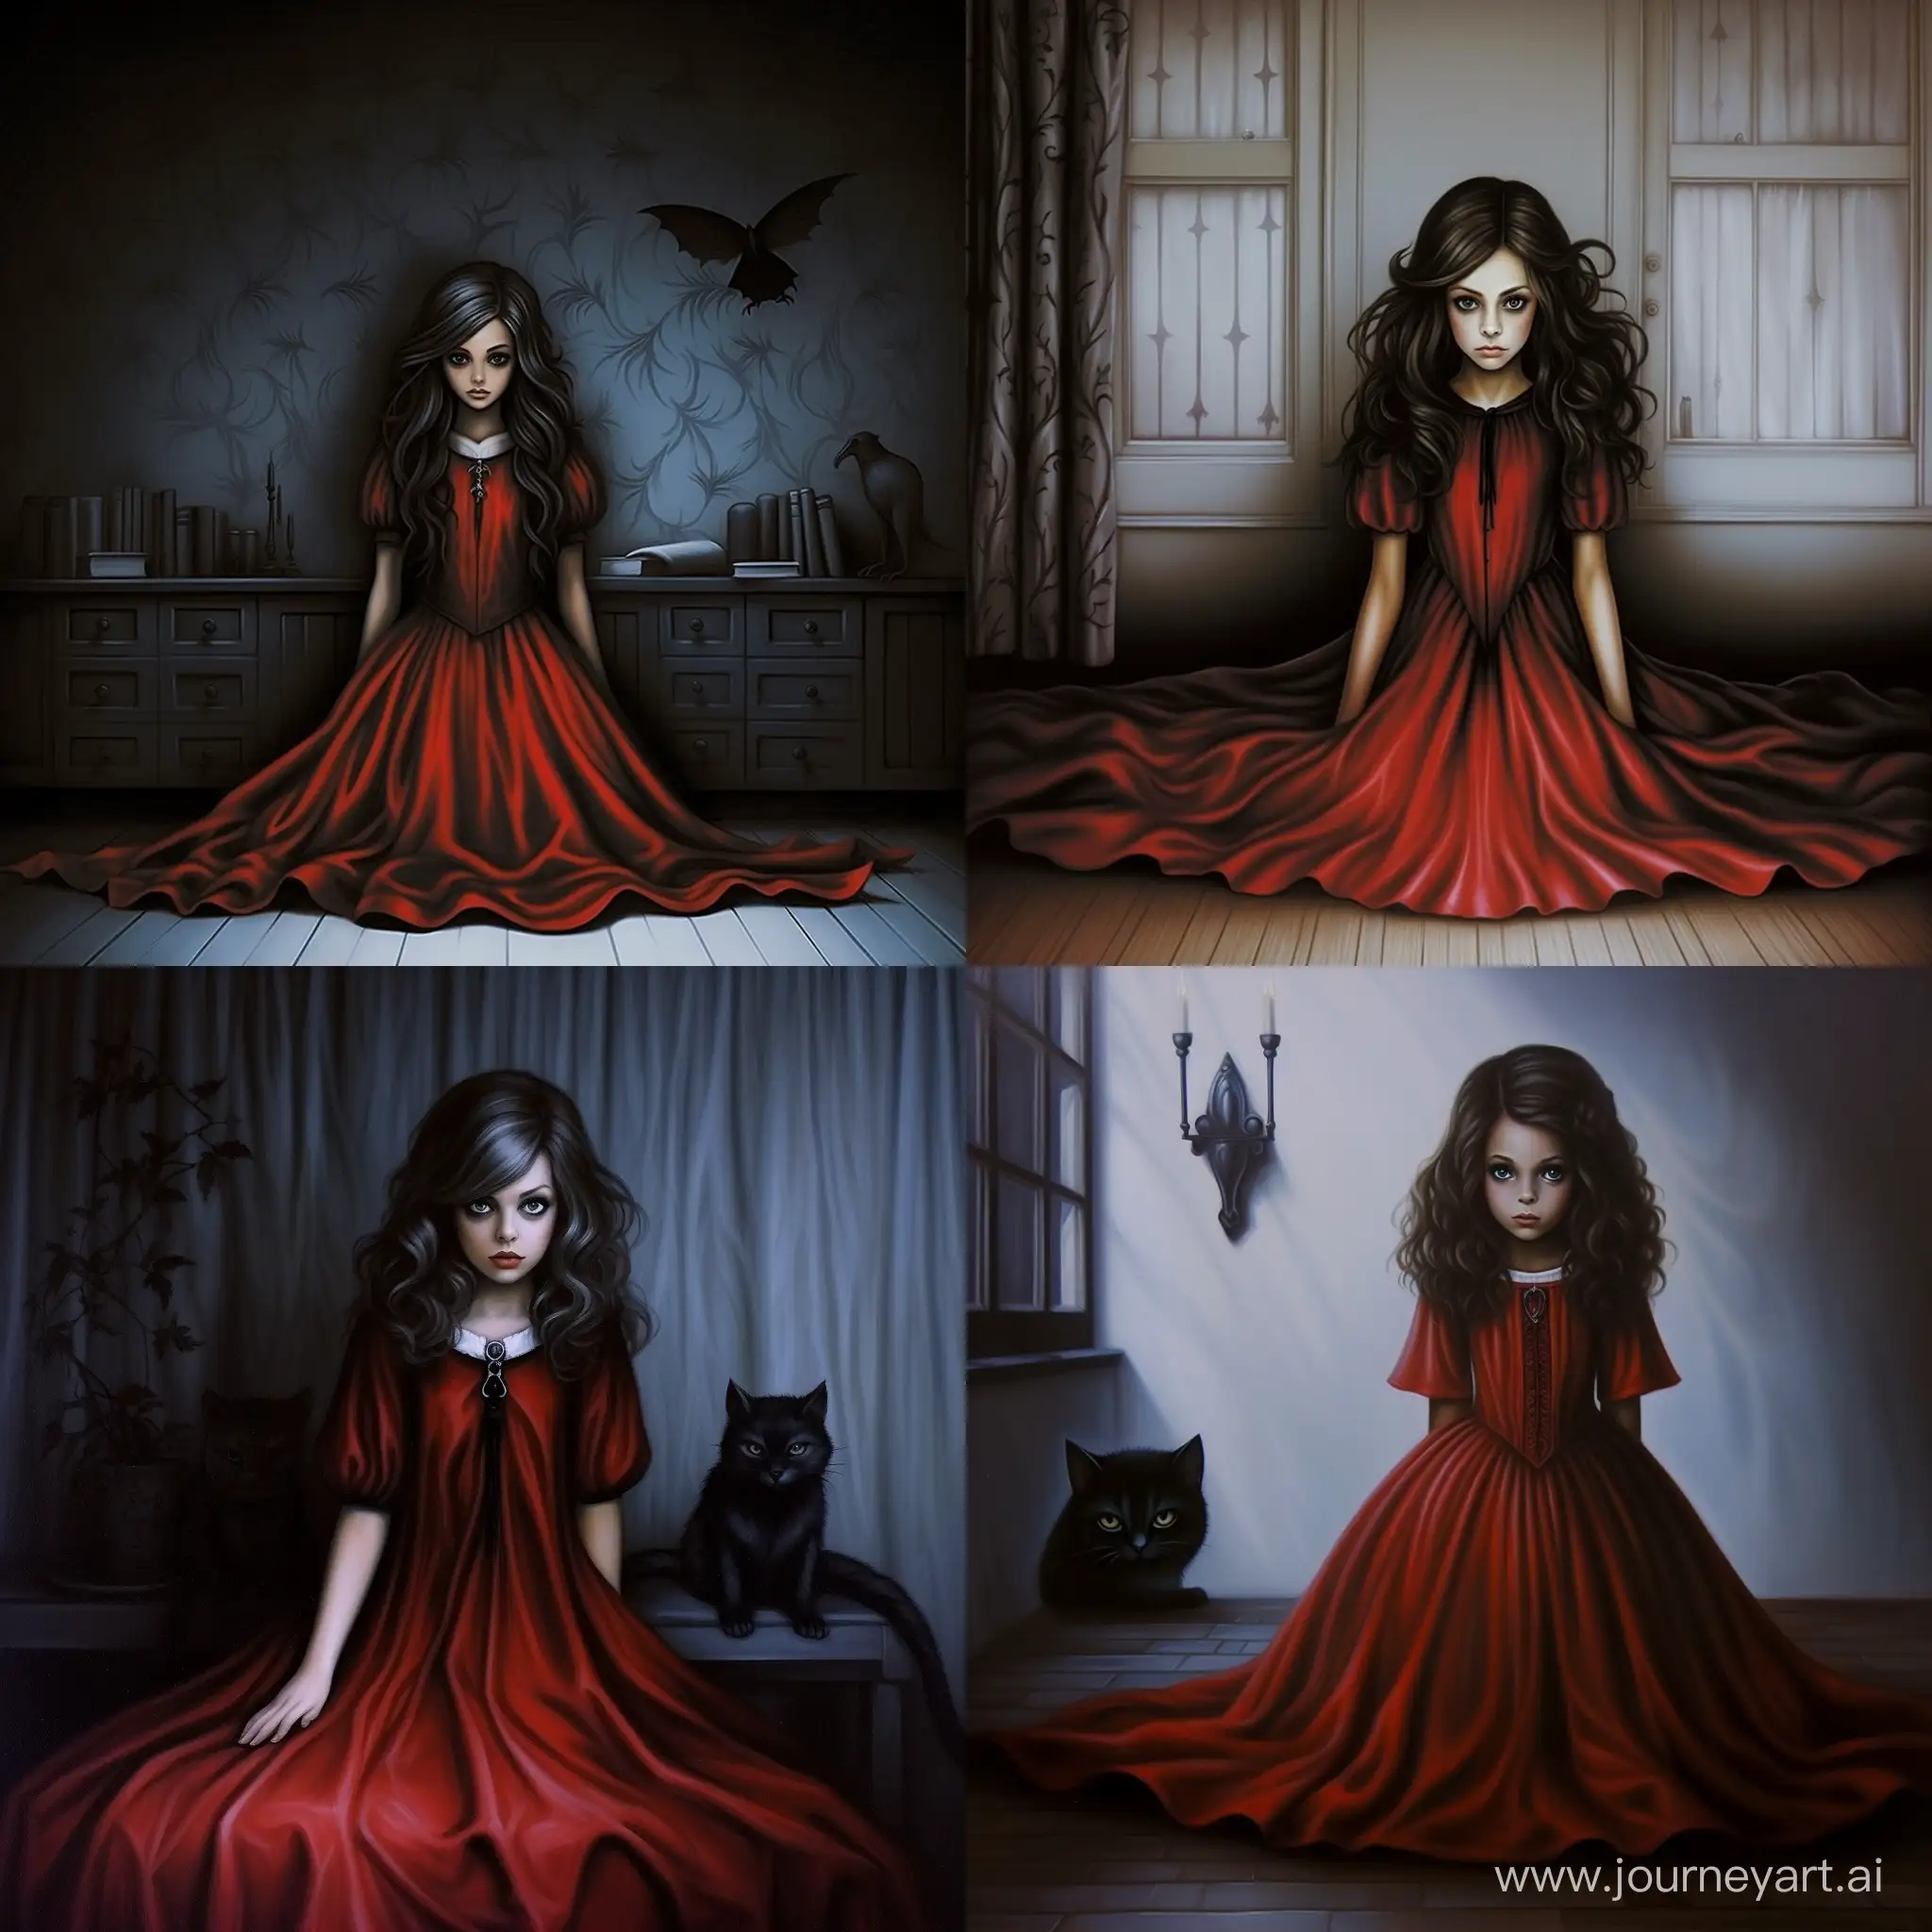 A girl with red hair in a black Gothic dress sleeps on a bed next to a Gothic-style cat

